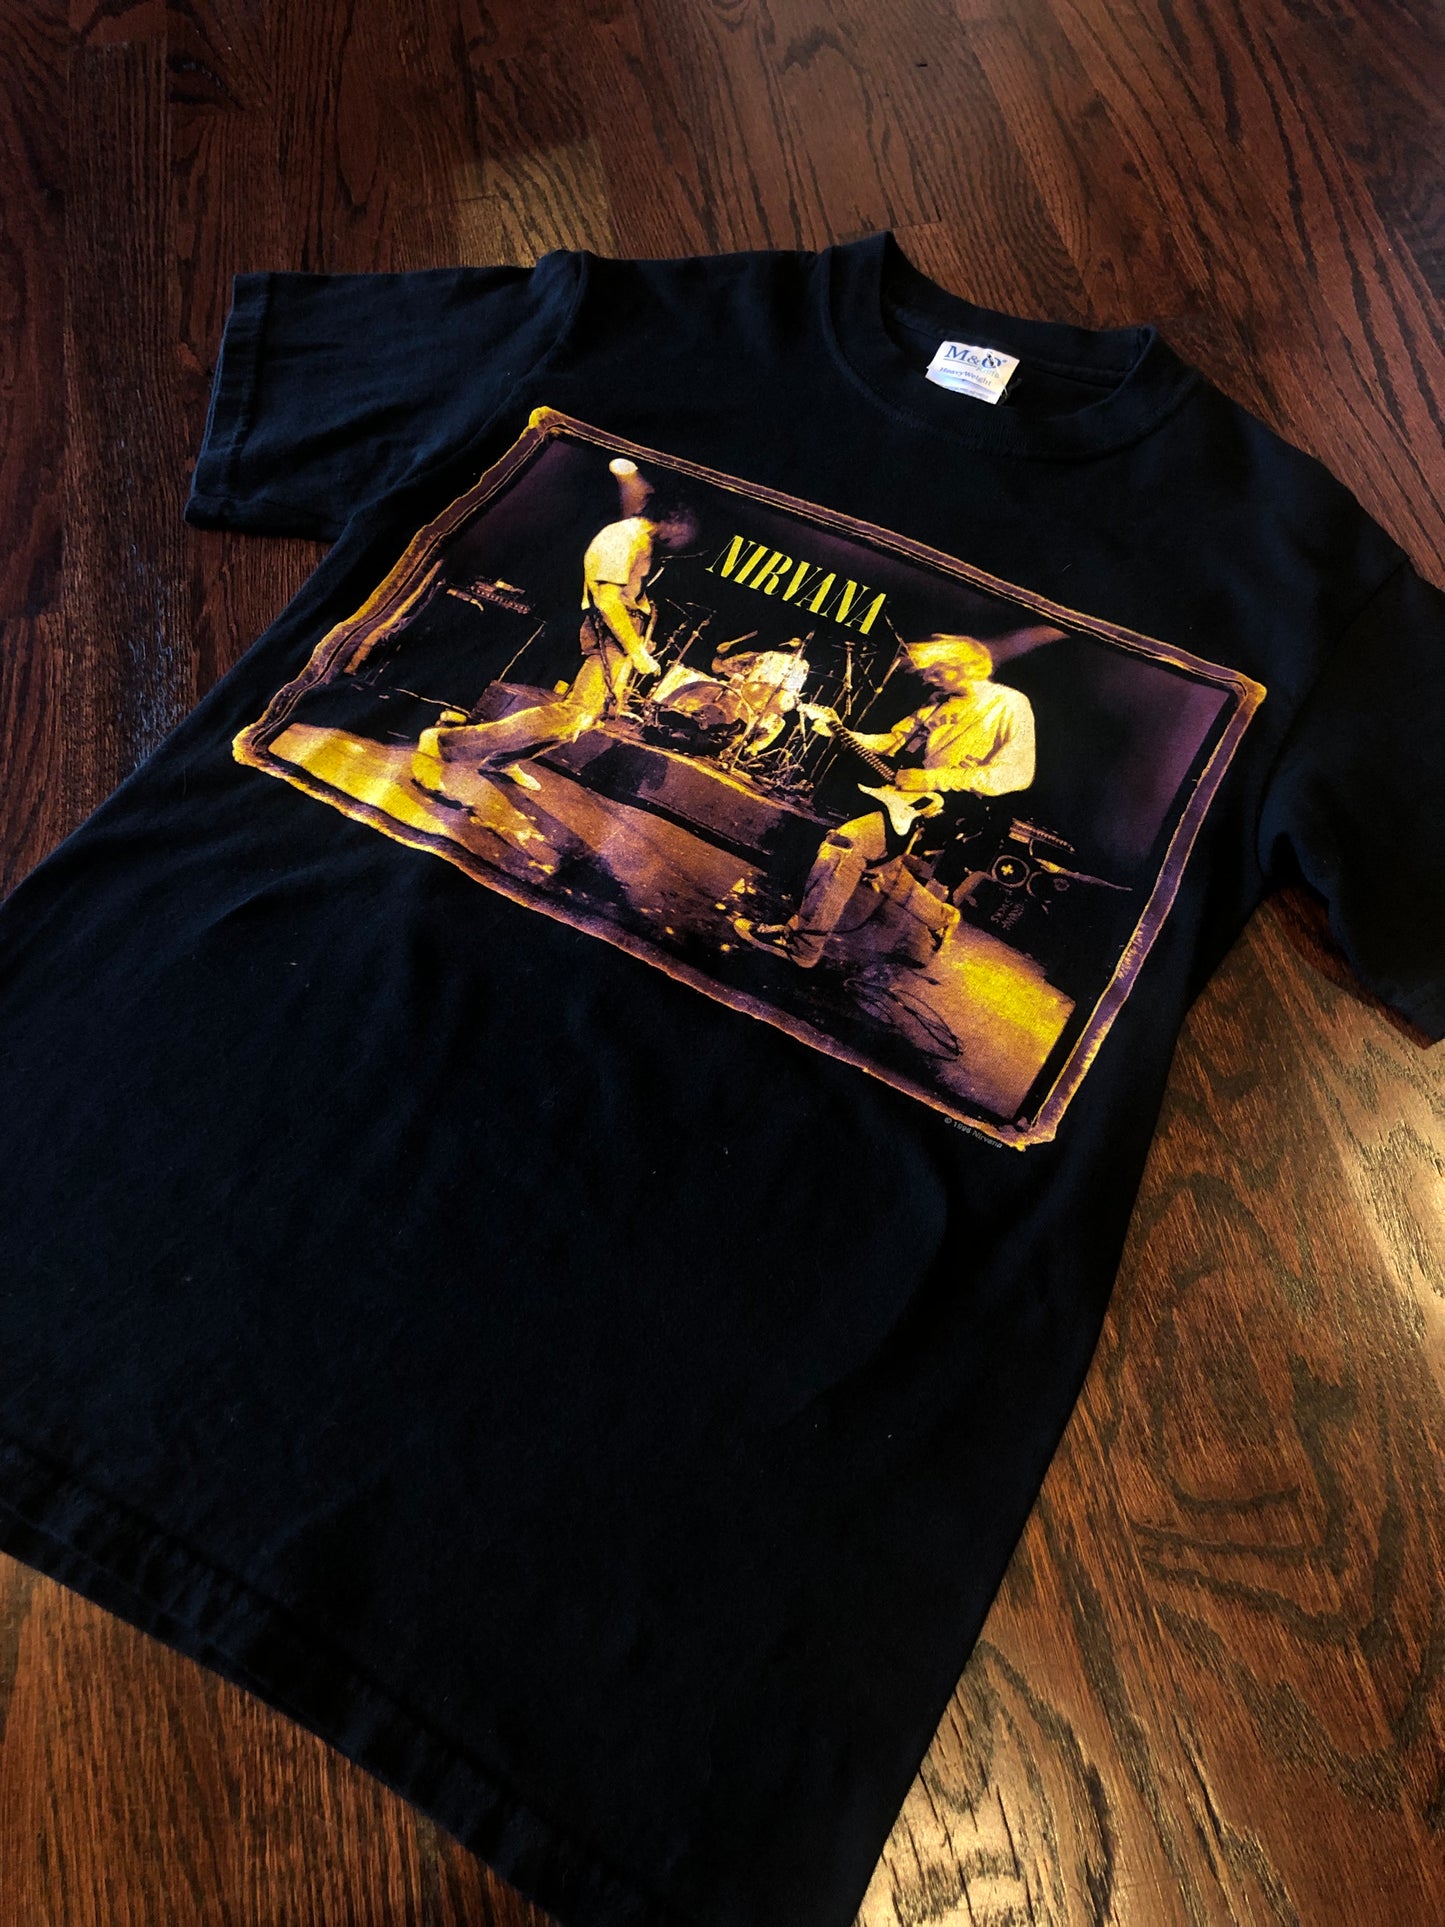 Vintage Nirvana “From the Muddy Banks of Wishkah” T-Shirt